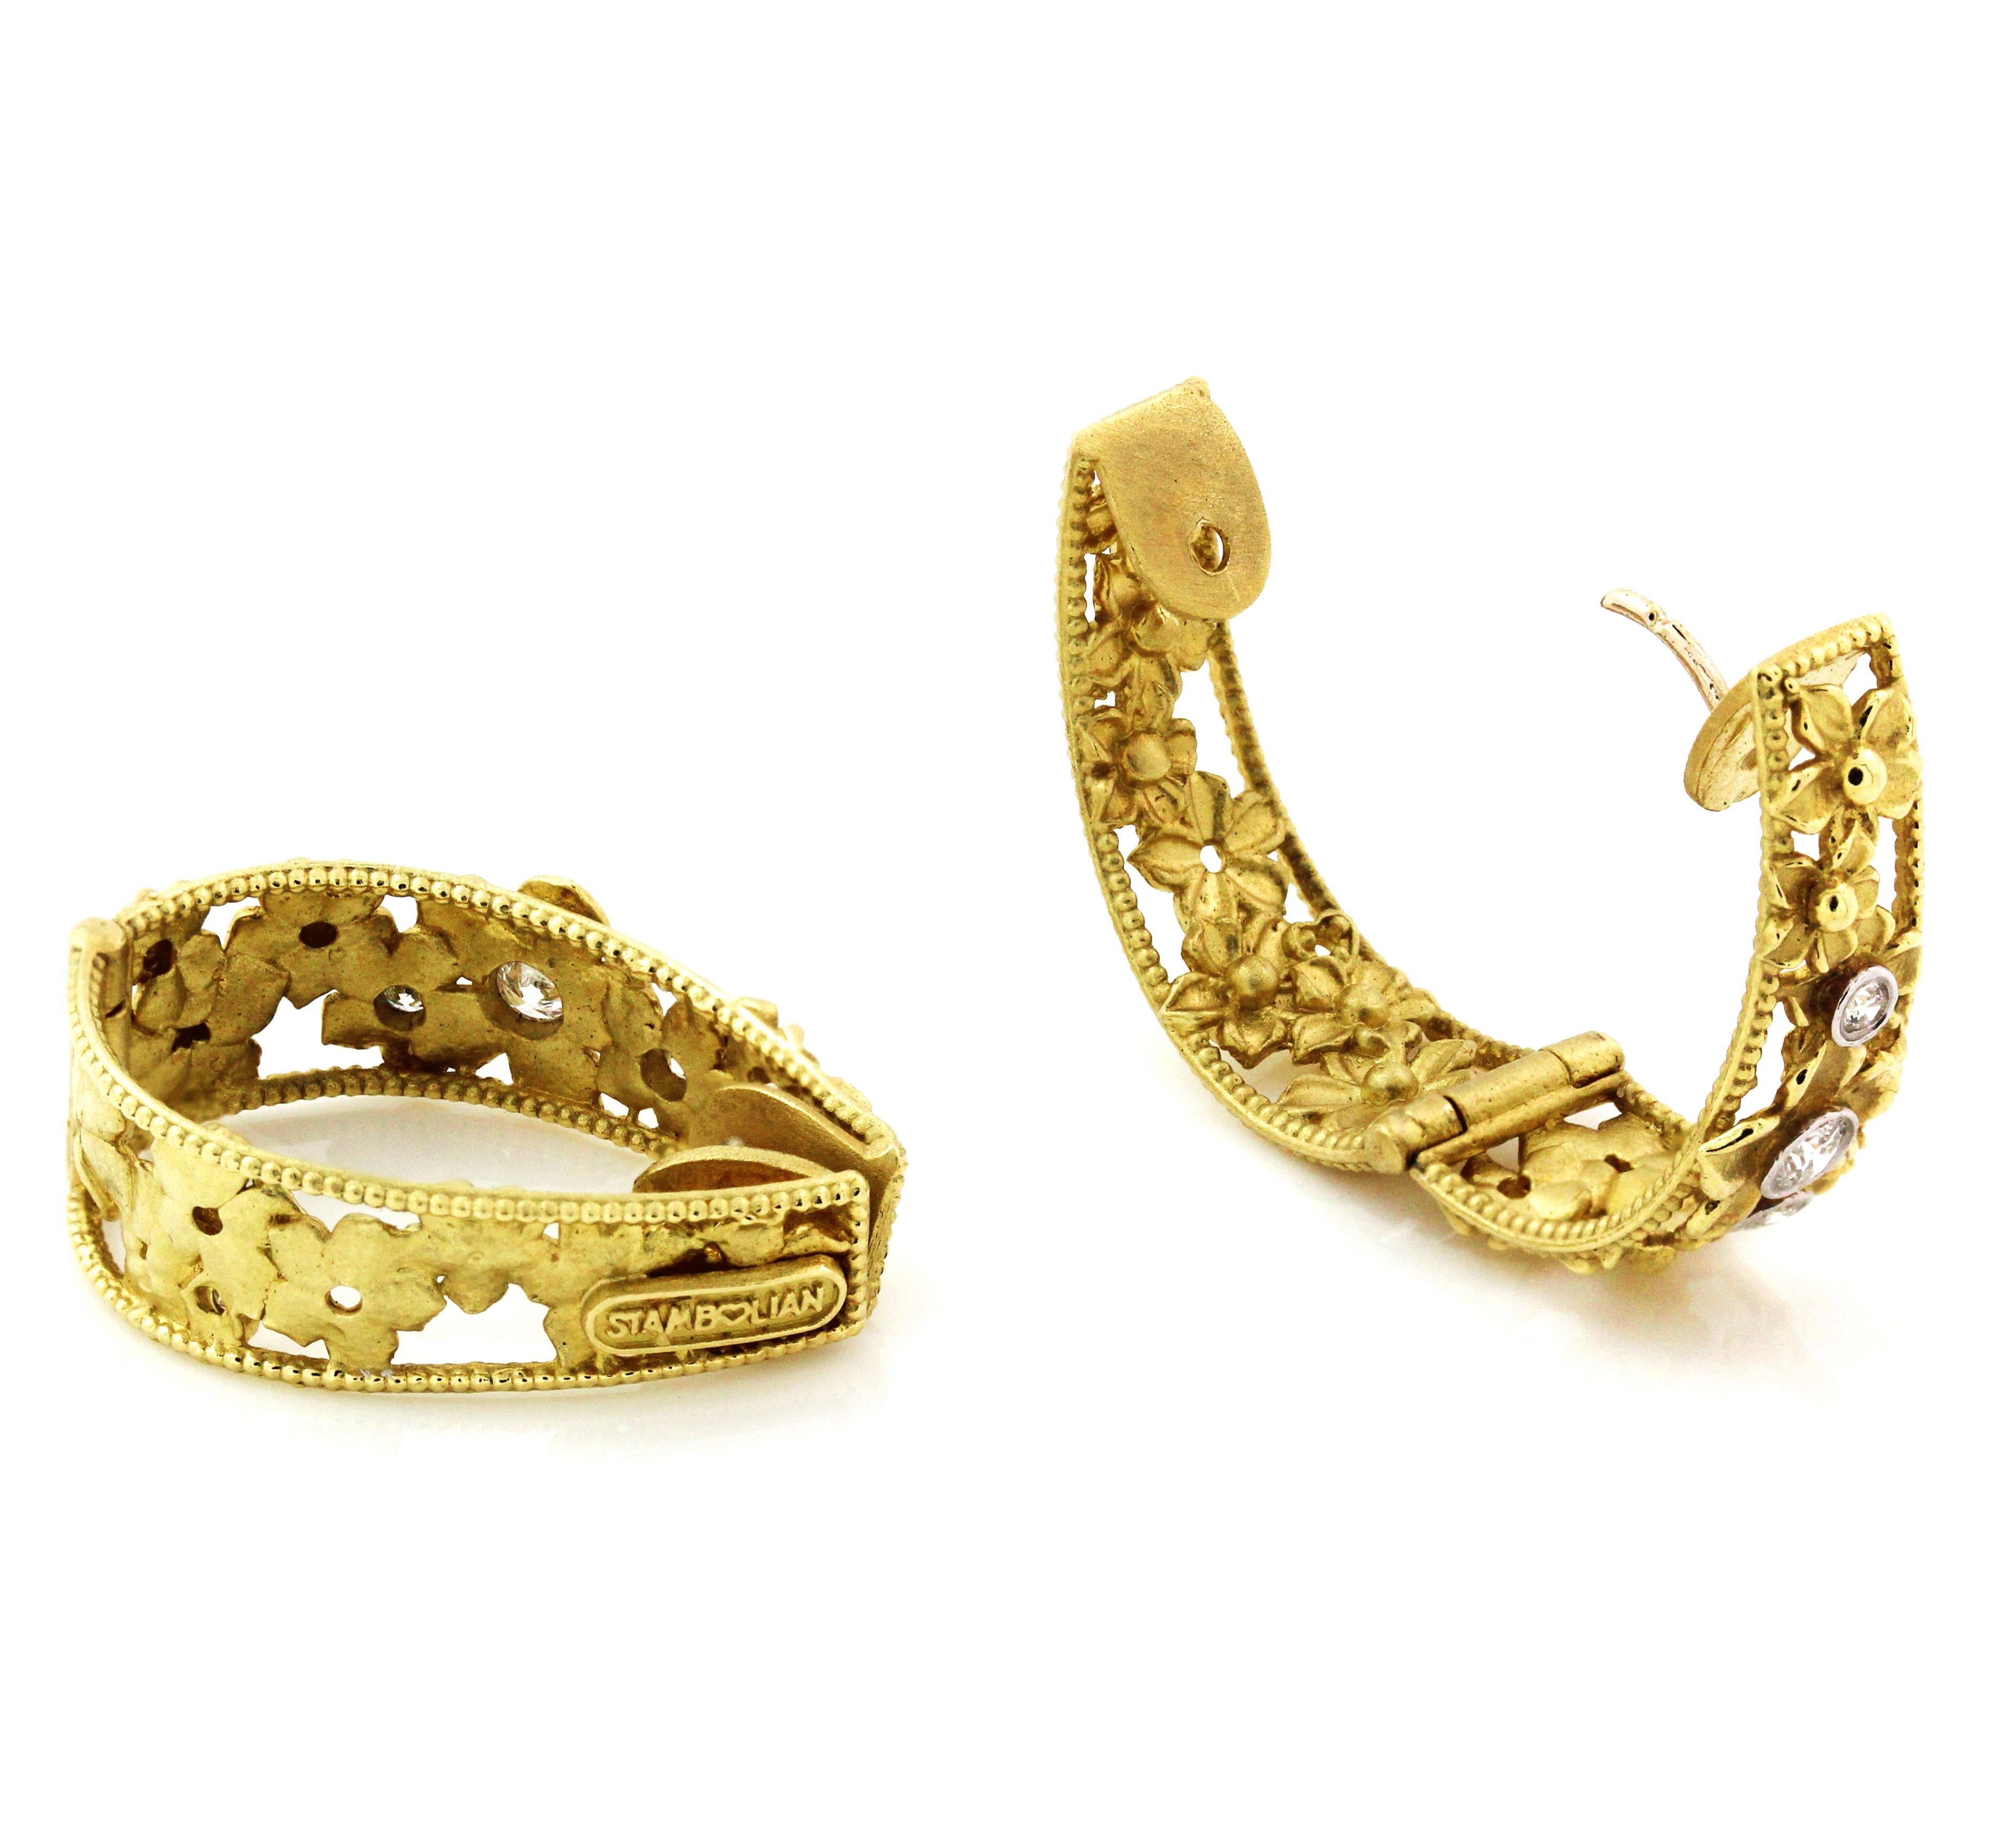 18K Yellow Gold and Diamond Floral Hoop Earrings by Stambolian

These are inside-out earrings with diamonds set on face of earrings and floral design continuing on the interior.

0.34ct. G color, VS clarity diamonds. 6 total stones.

Earrings are 1